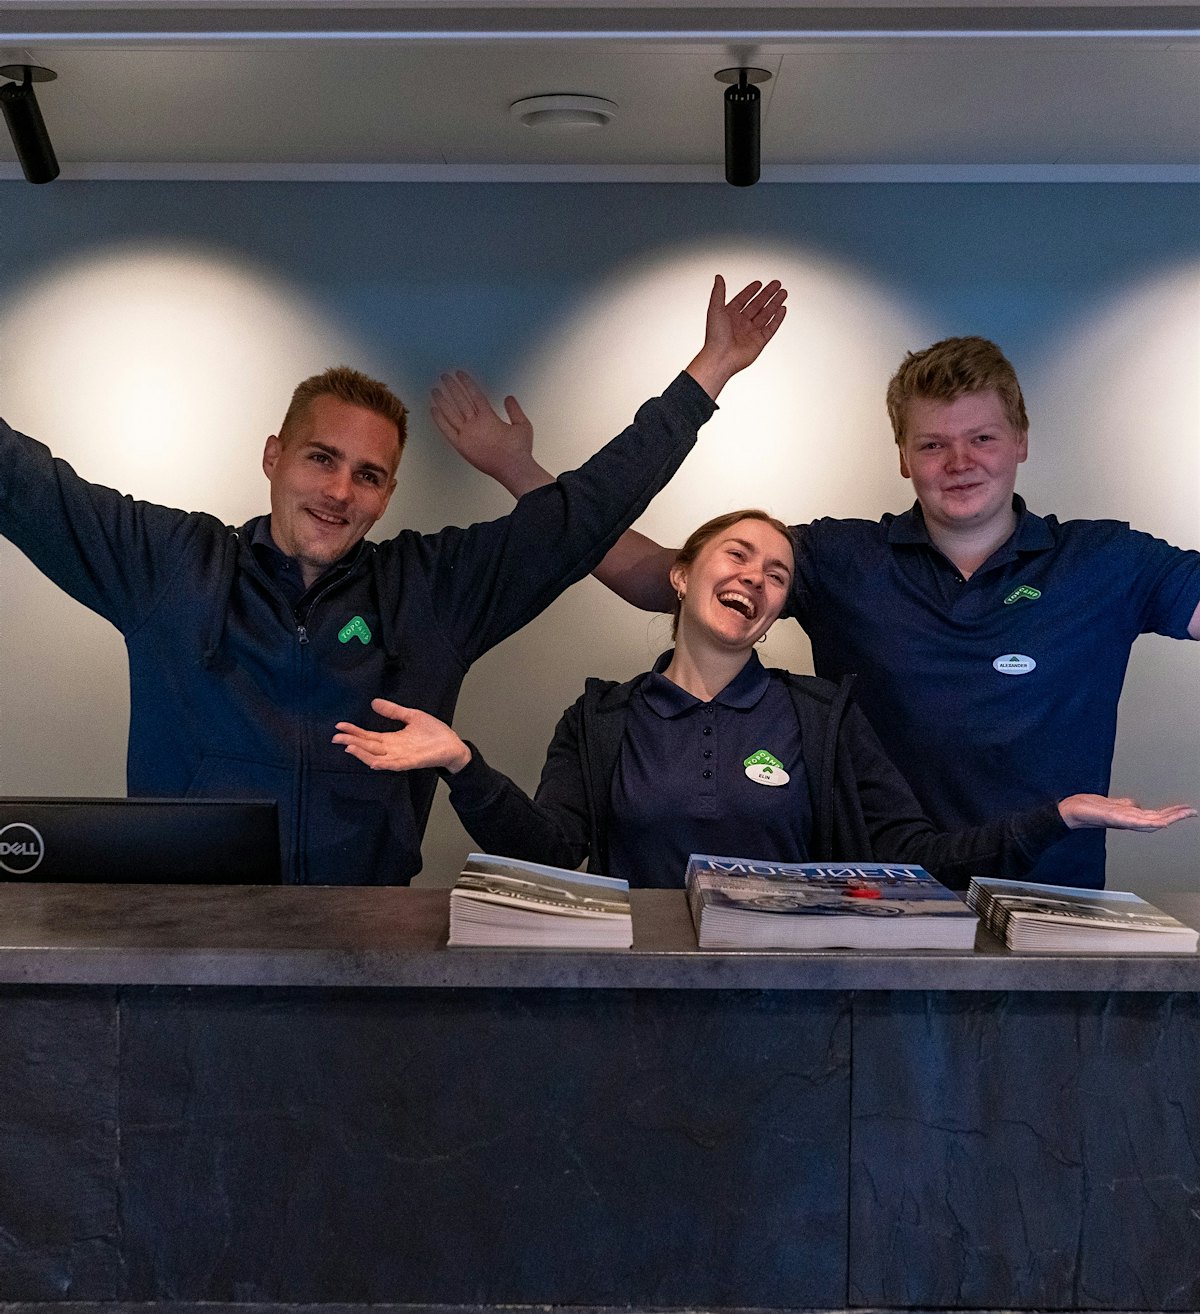 Three employees stand behind a reception and smile with raised hands.